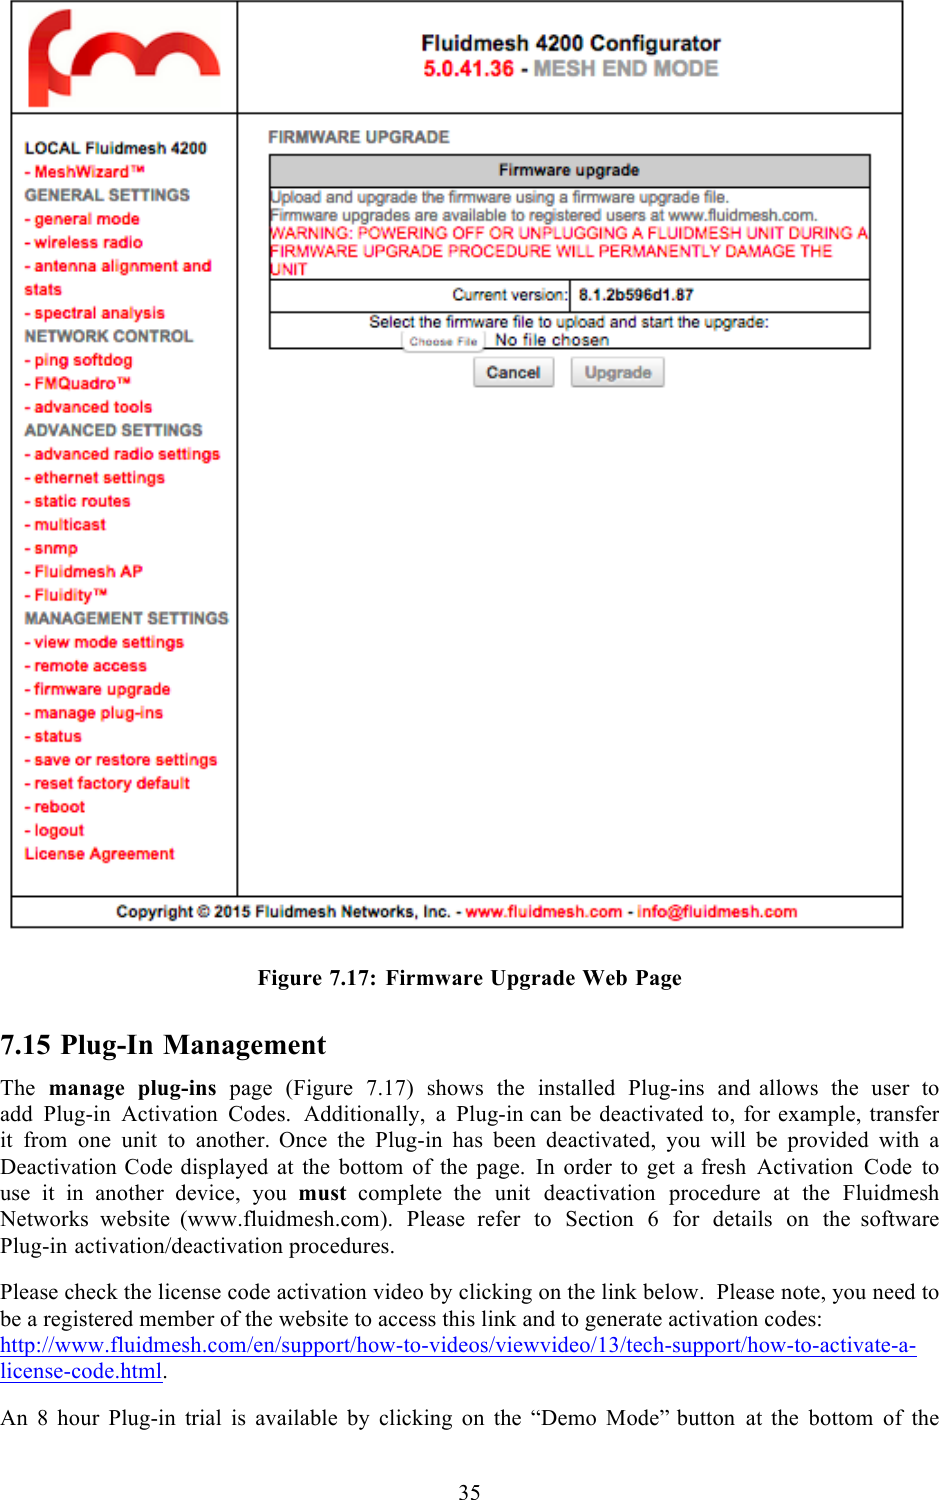  35    Figure 7.17: Firmware Upgrade Web Page 7.15 Plug-In Management The manage plug-ins page  (Figure 7.17) shows the installed Plug-ins and  allows the user to add Plug-in Activation Codes.  Additionally,  a  Plug-in can be deactivated to, for example, transfer it from one unit to another.  Once the Plug-in has been deactivated, you will be provided with a Deactivation Code displayed at the bottom of the page. In order to get a fresh Activation Code to use  it  in  another device, you  must complete  the unit deactivation procedure at the Fluidmesh Networks website  (www.fluidmesh.com). Please refer to Section 6 for details on the  software Plug-in activation/deactivation procedures.  Please check the license code activation video by clicking on the link below.  Please note, you need to be a registered member of the website to access this link and to generate activation codes: http://www.fluidmesh.com/en/support/how-to-videos/viewvideo/13/tech-support/how-to-activate-a-license-code.html.  An  8  hour  Plug-in trial is available by clicking on the “Demo Mode” button at the bottom of the 